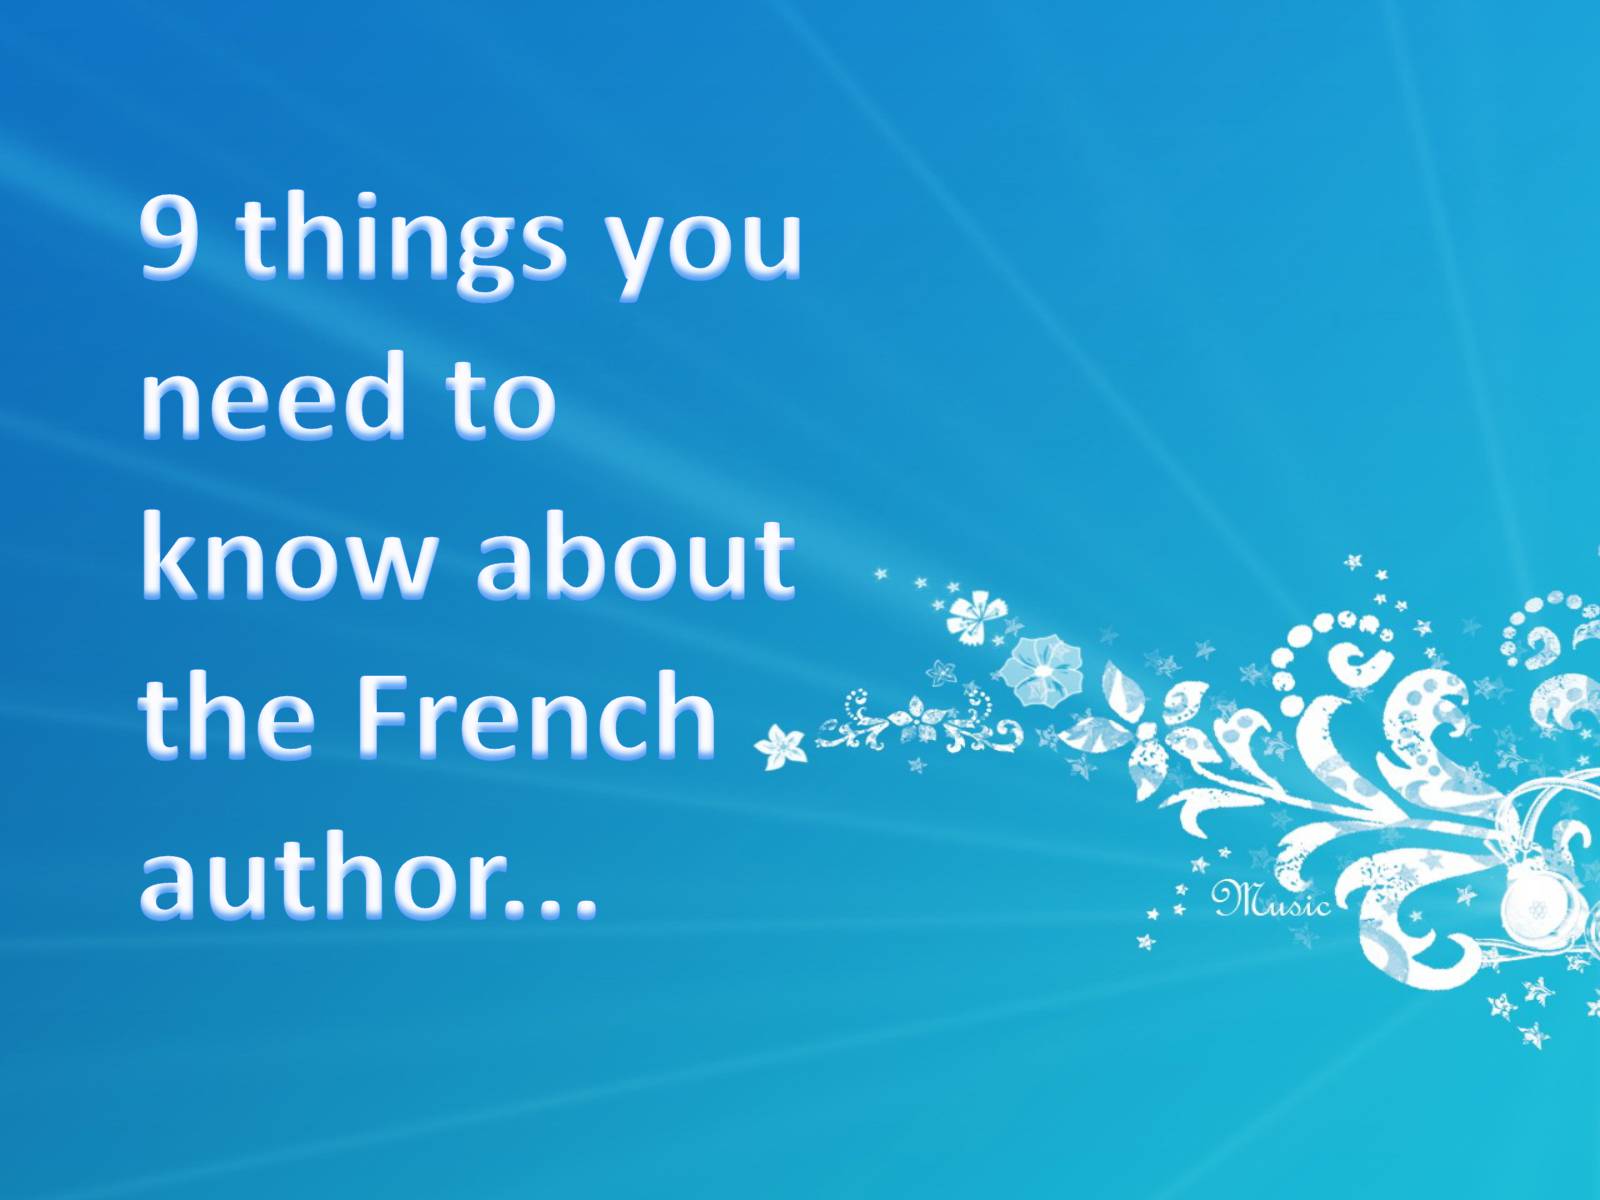 Презентація на тему «9 things you need to know about the French author» - Слайд #1